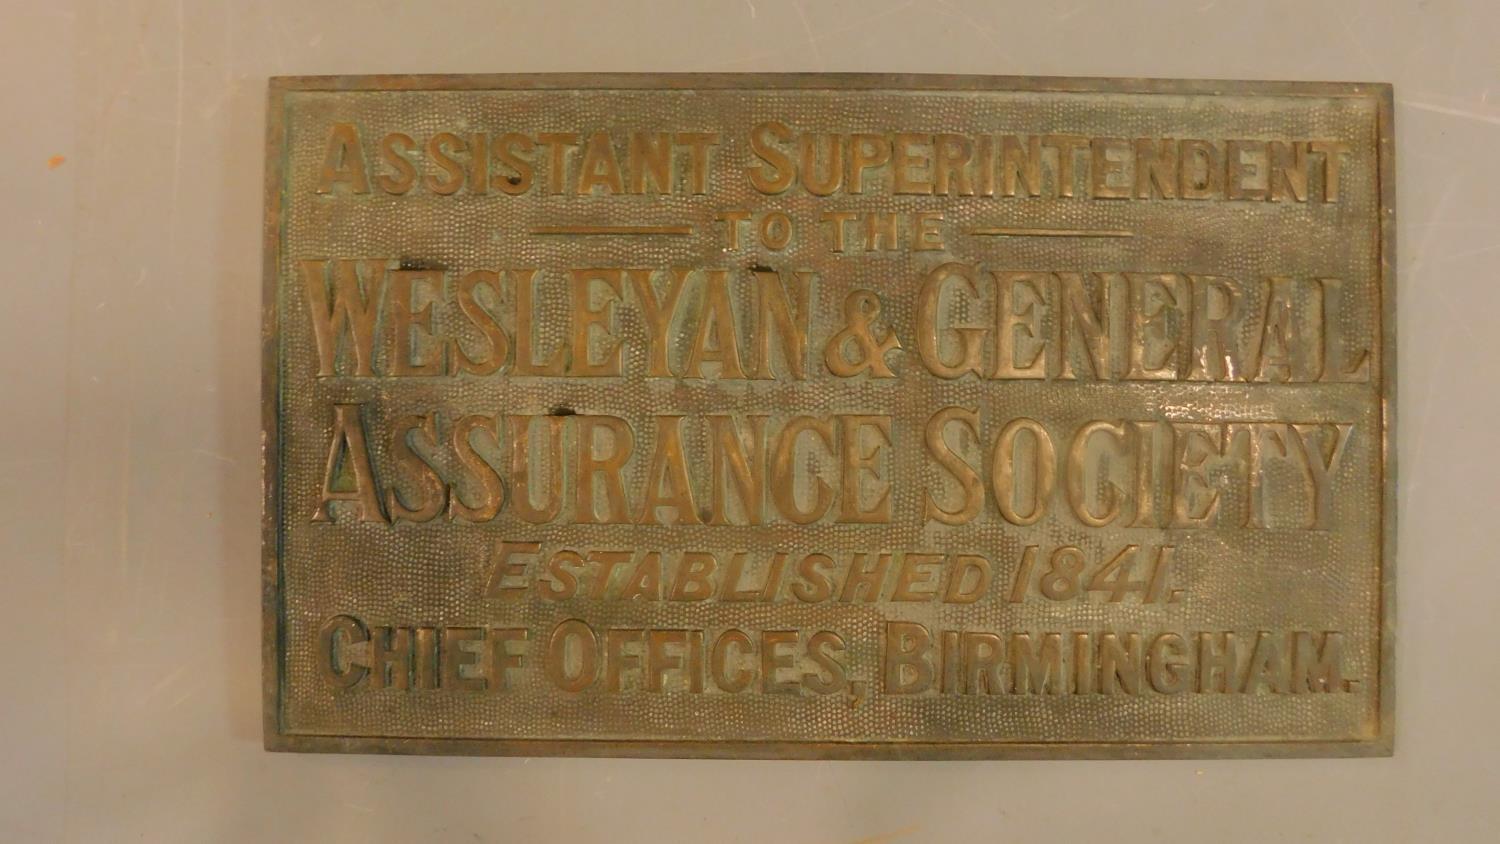 A collection of three brass wall plates for the Weslyan and General Assurance society. - Image 3 of 4